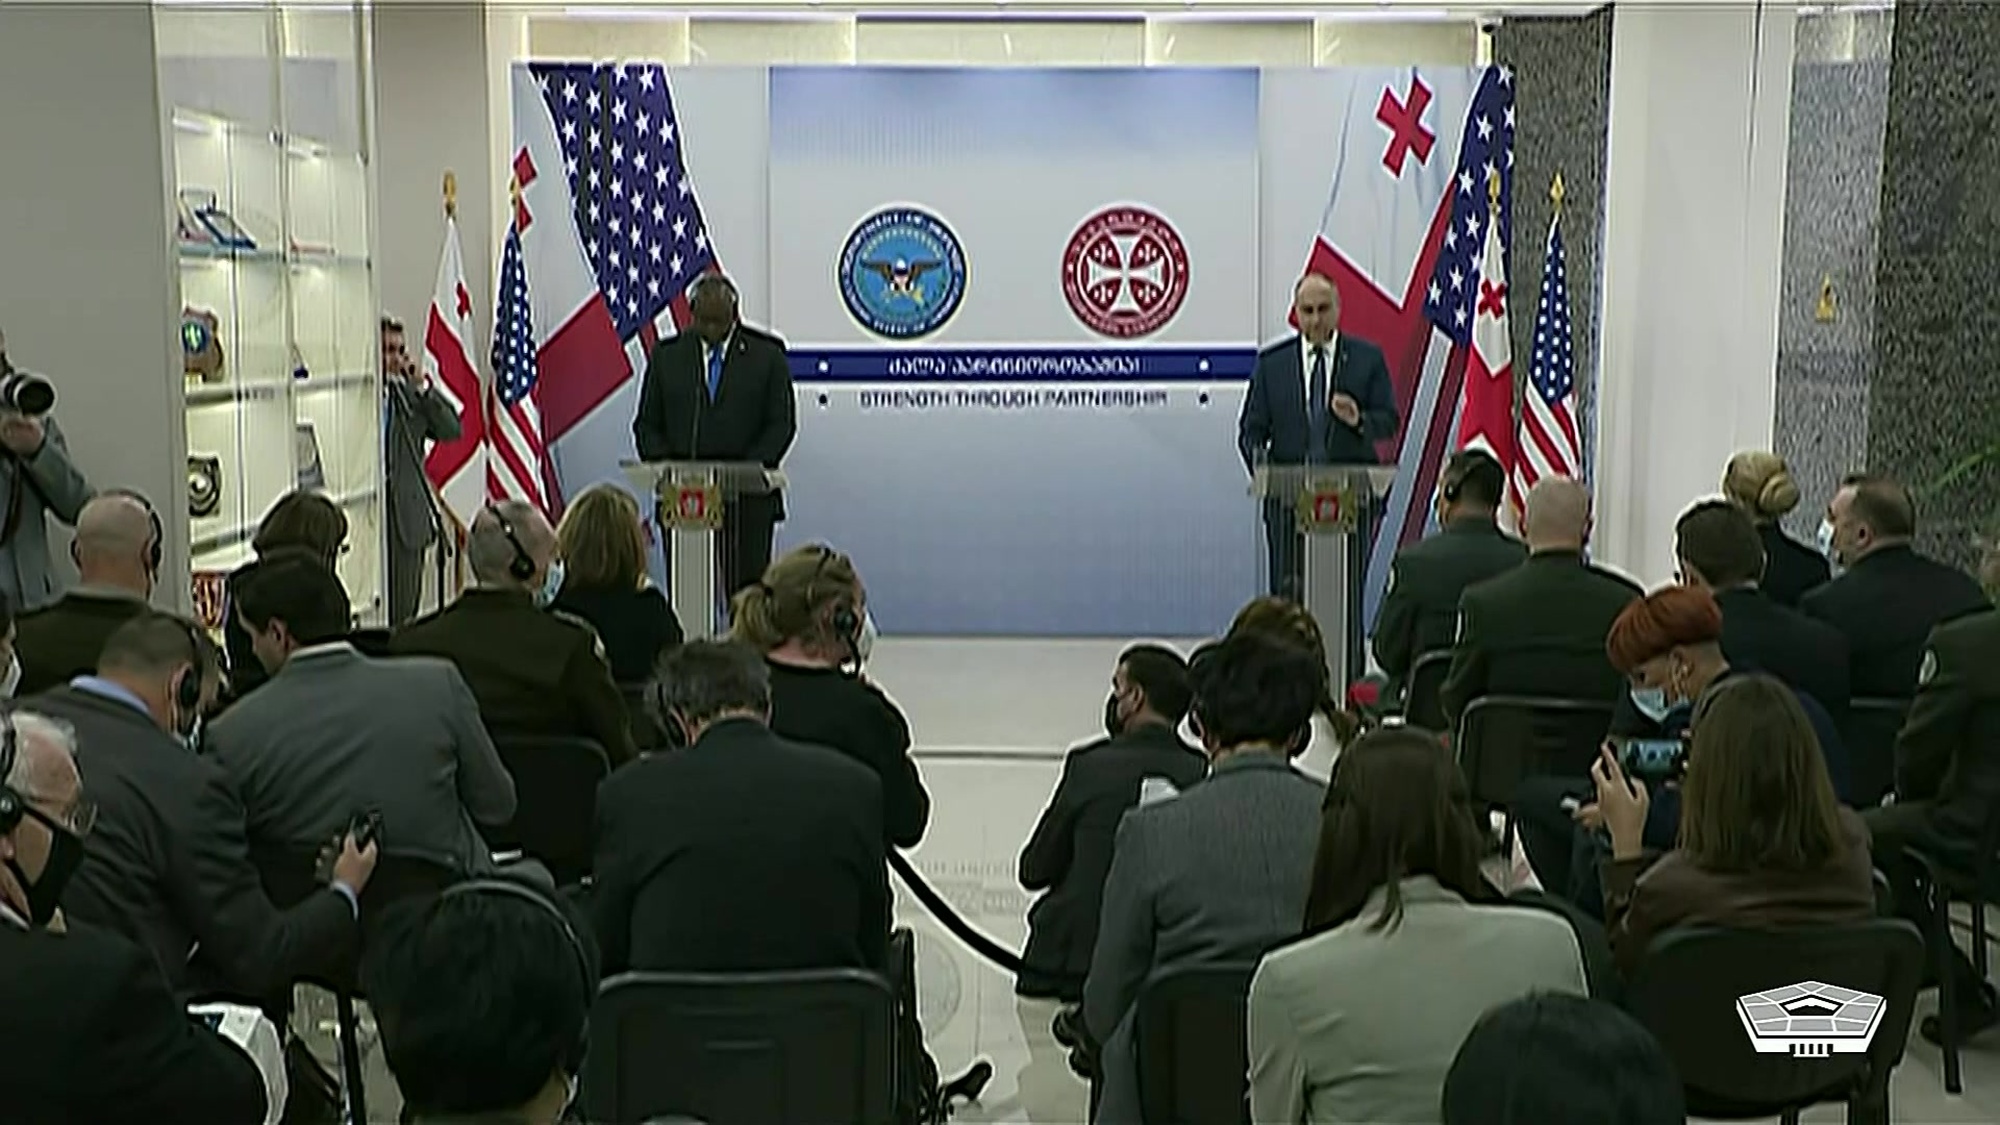 Secretary of Defense Lloyd J. Austin III and Juansher Burchuladze, the Georgian defense minister, hold a joint press conference in Tbilisi, Georgia.